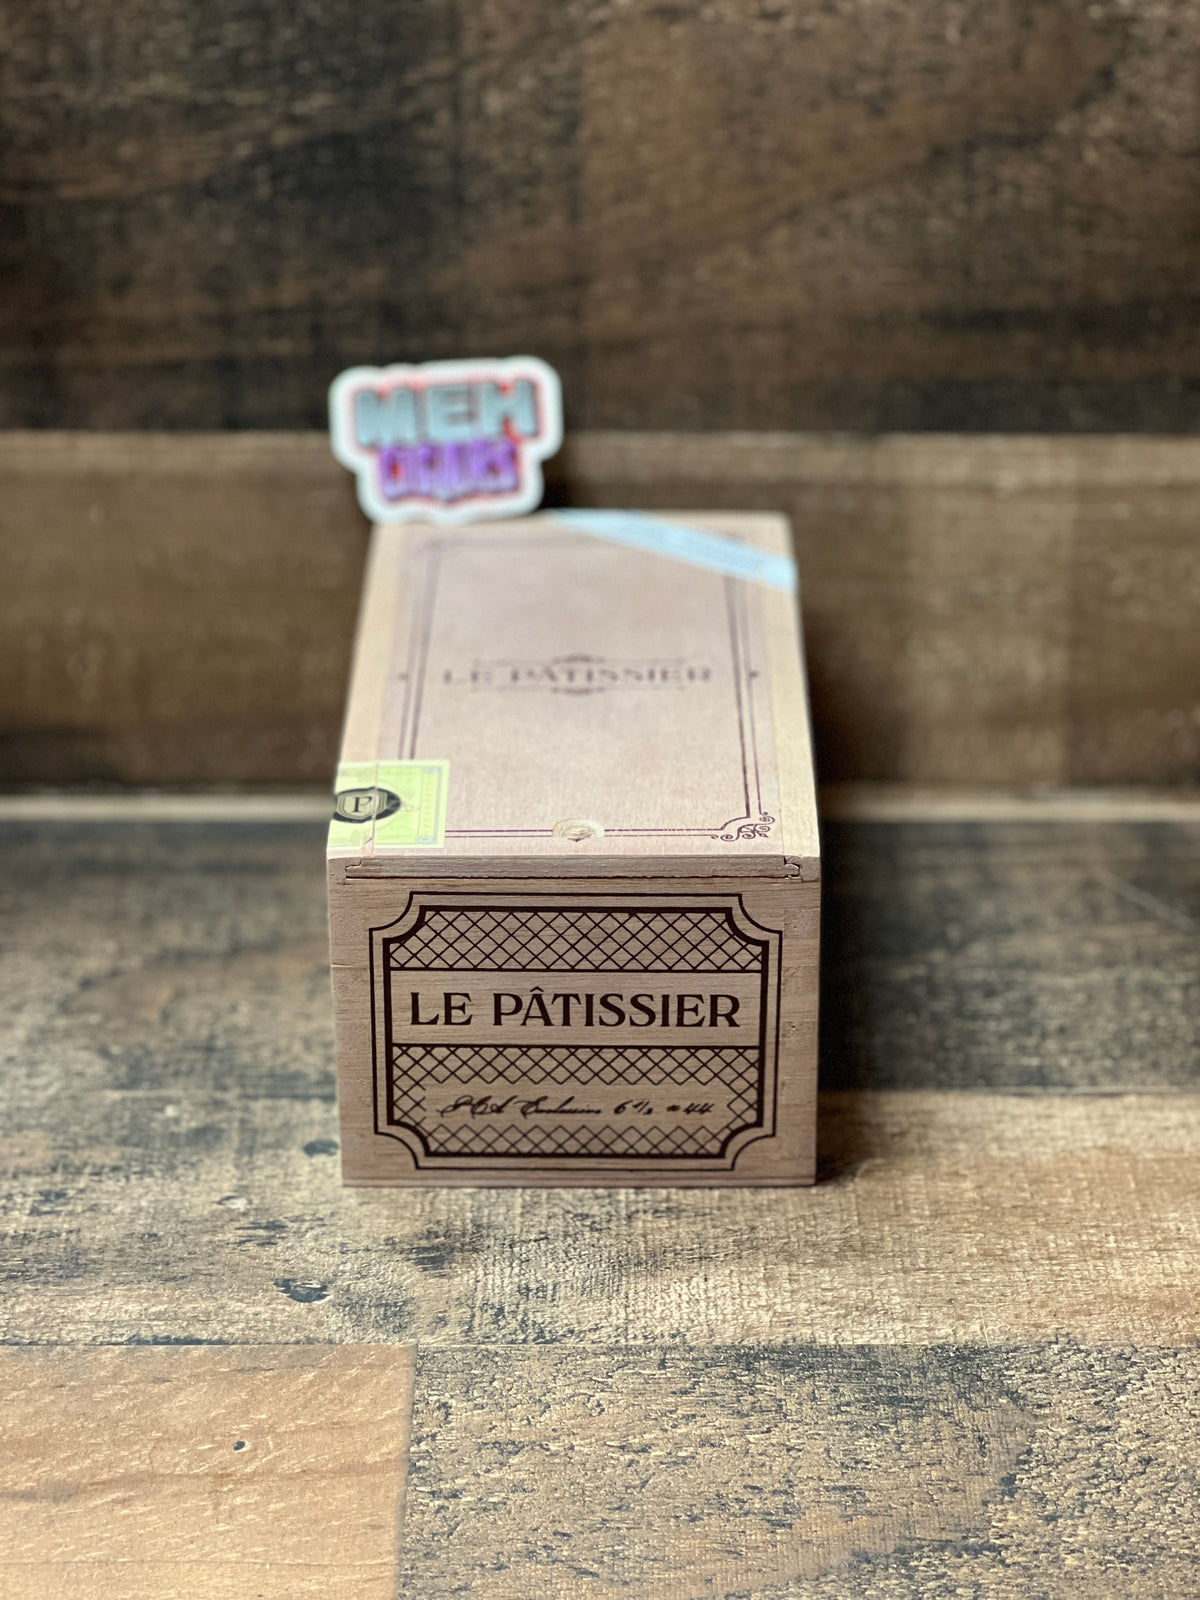 Crowned Heads Special Editions Le Patissier Corona Gorda